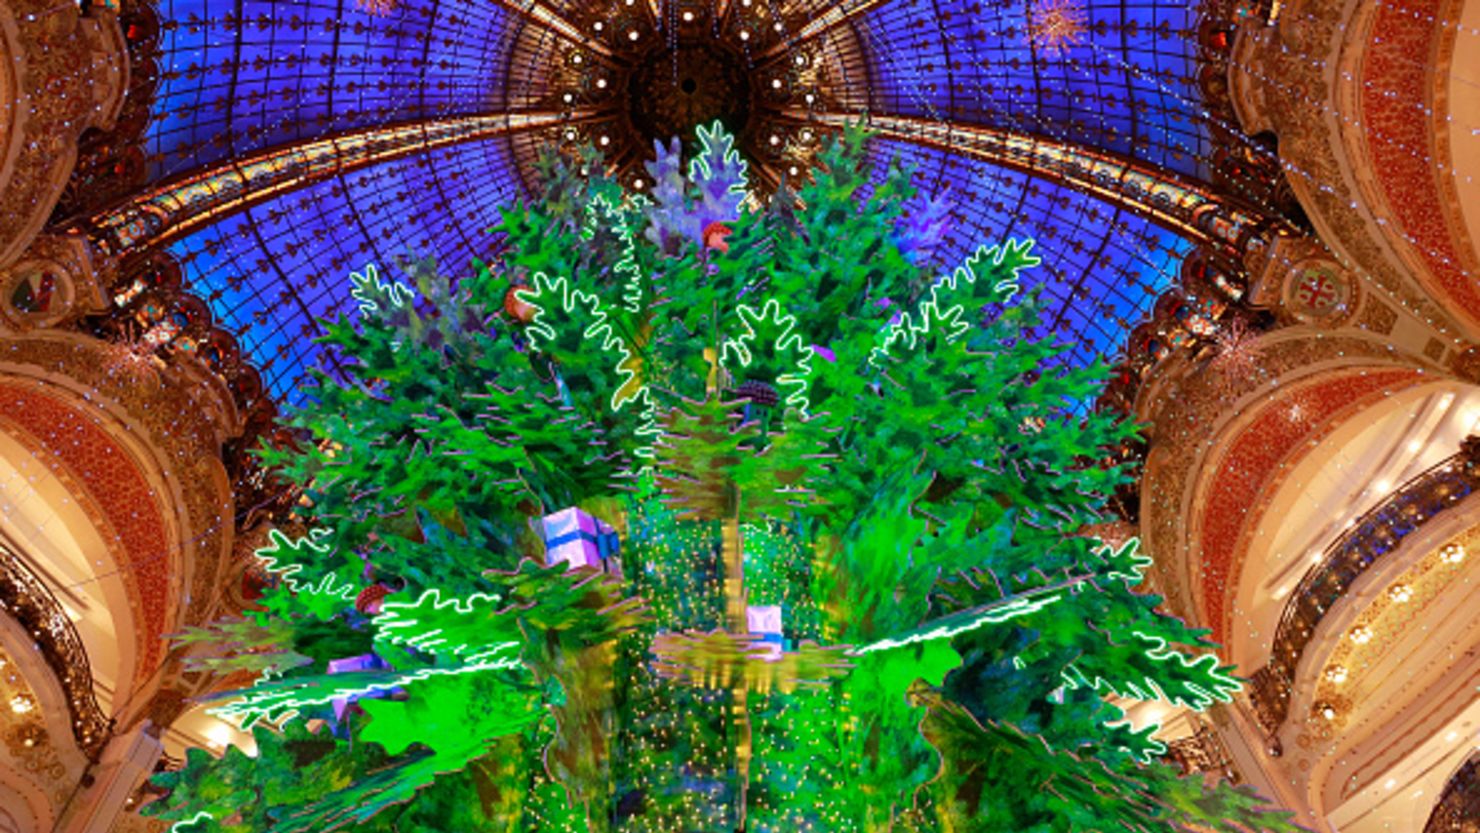 CNNE 1317173 - "planete sapin" - les galeries lafayette christmas decorations inauguration in paris